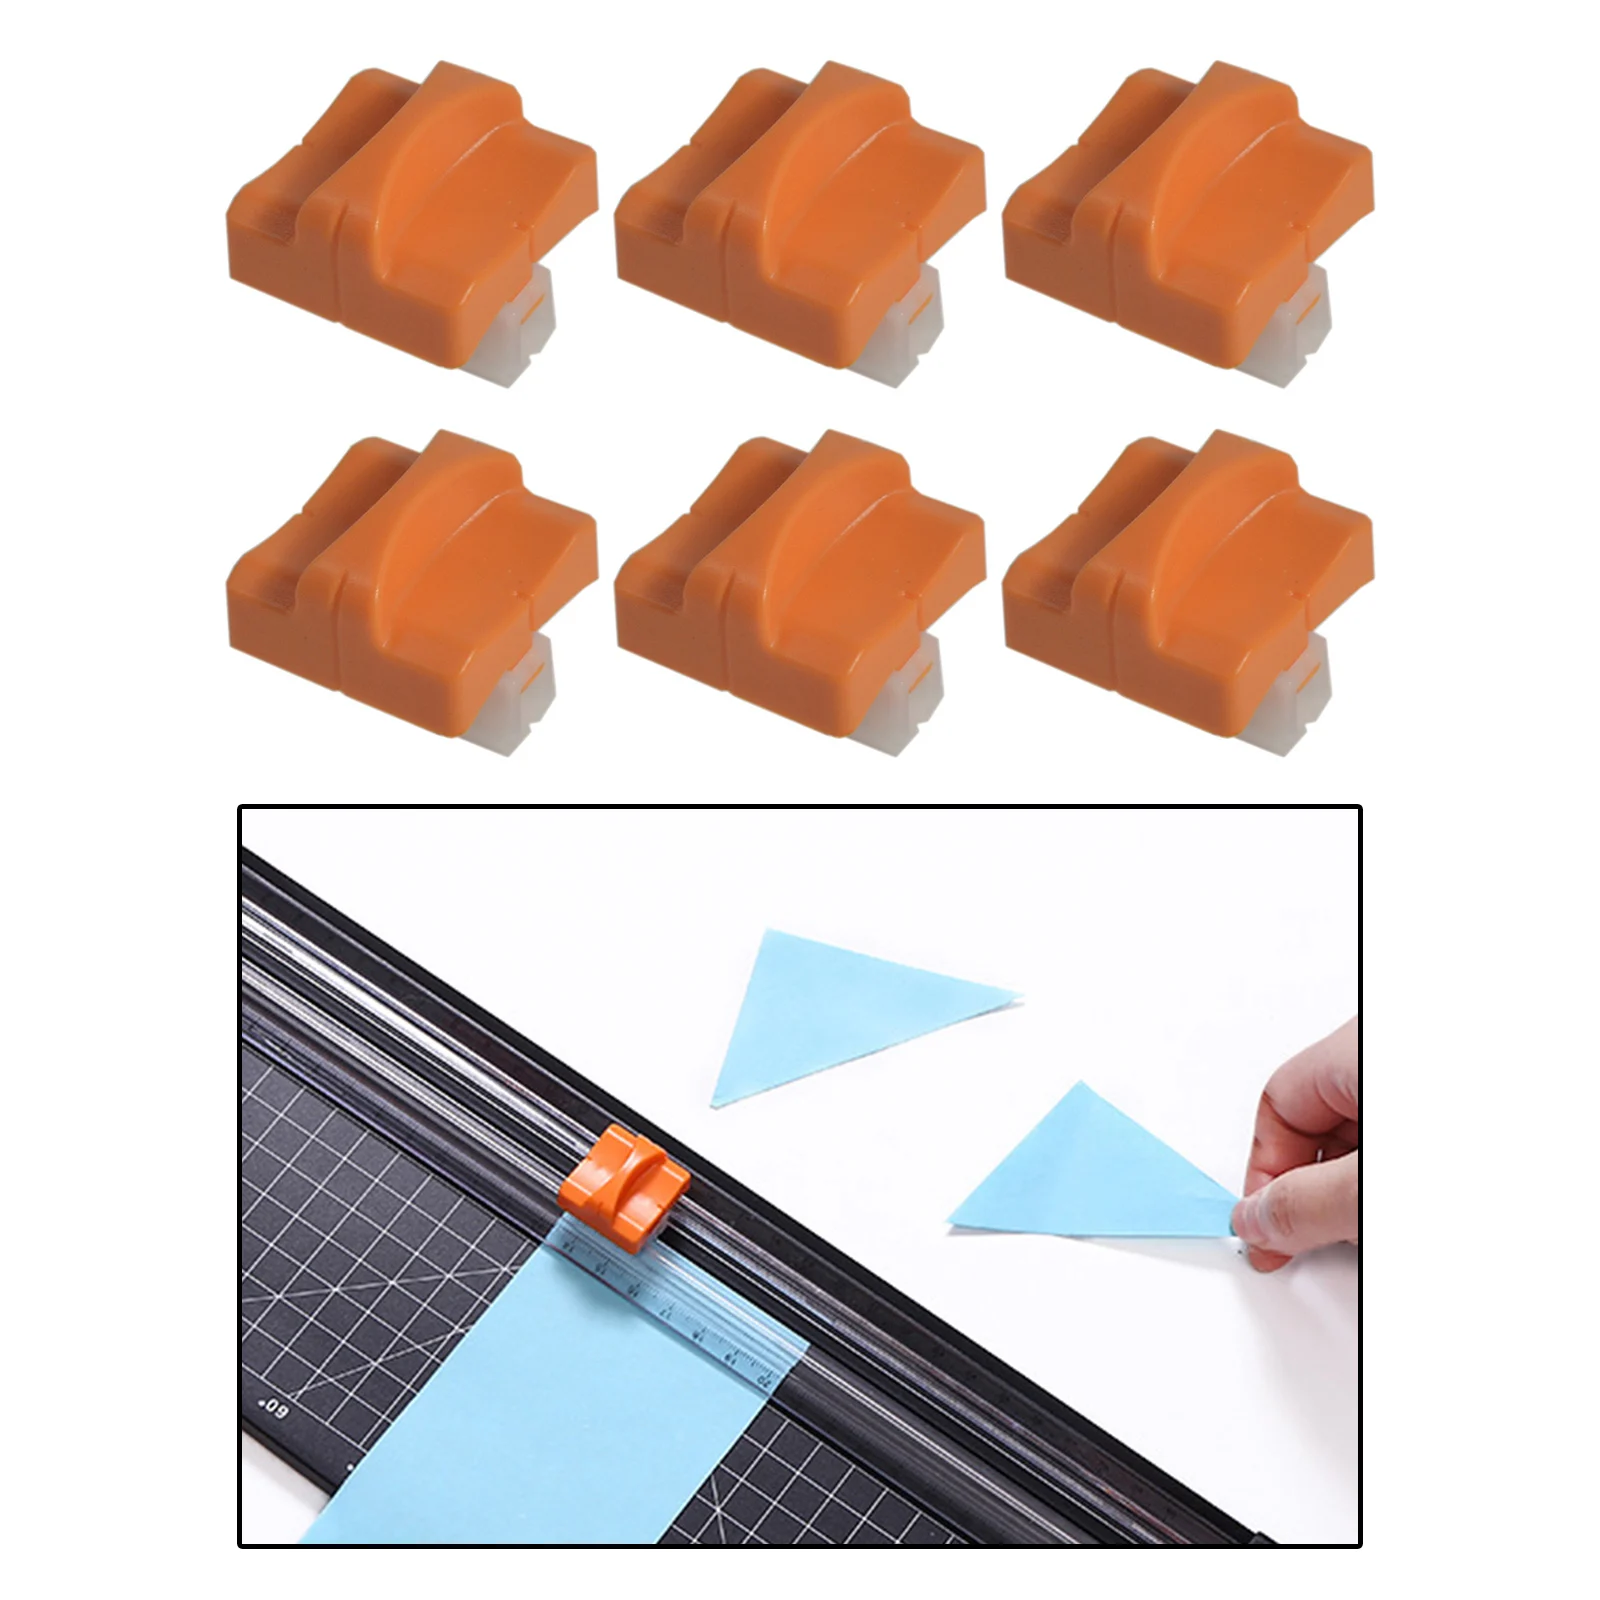 6x Paper Cutter Replacement Blades Trimmer Refill Cutting Card Picture A4 Paper Label Scrapbooking Trimming Tool Home Supplies